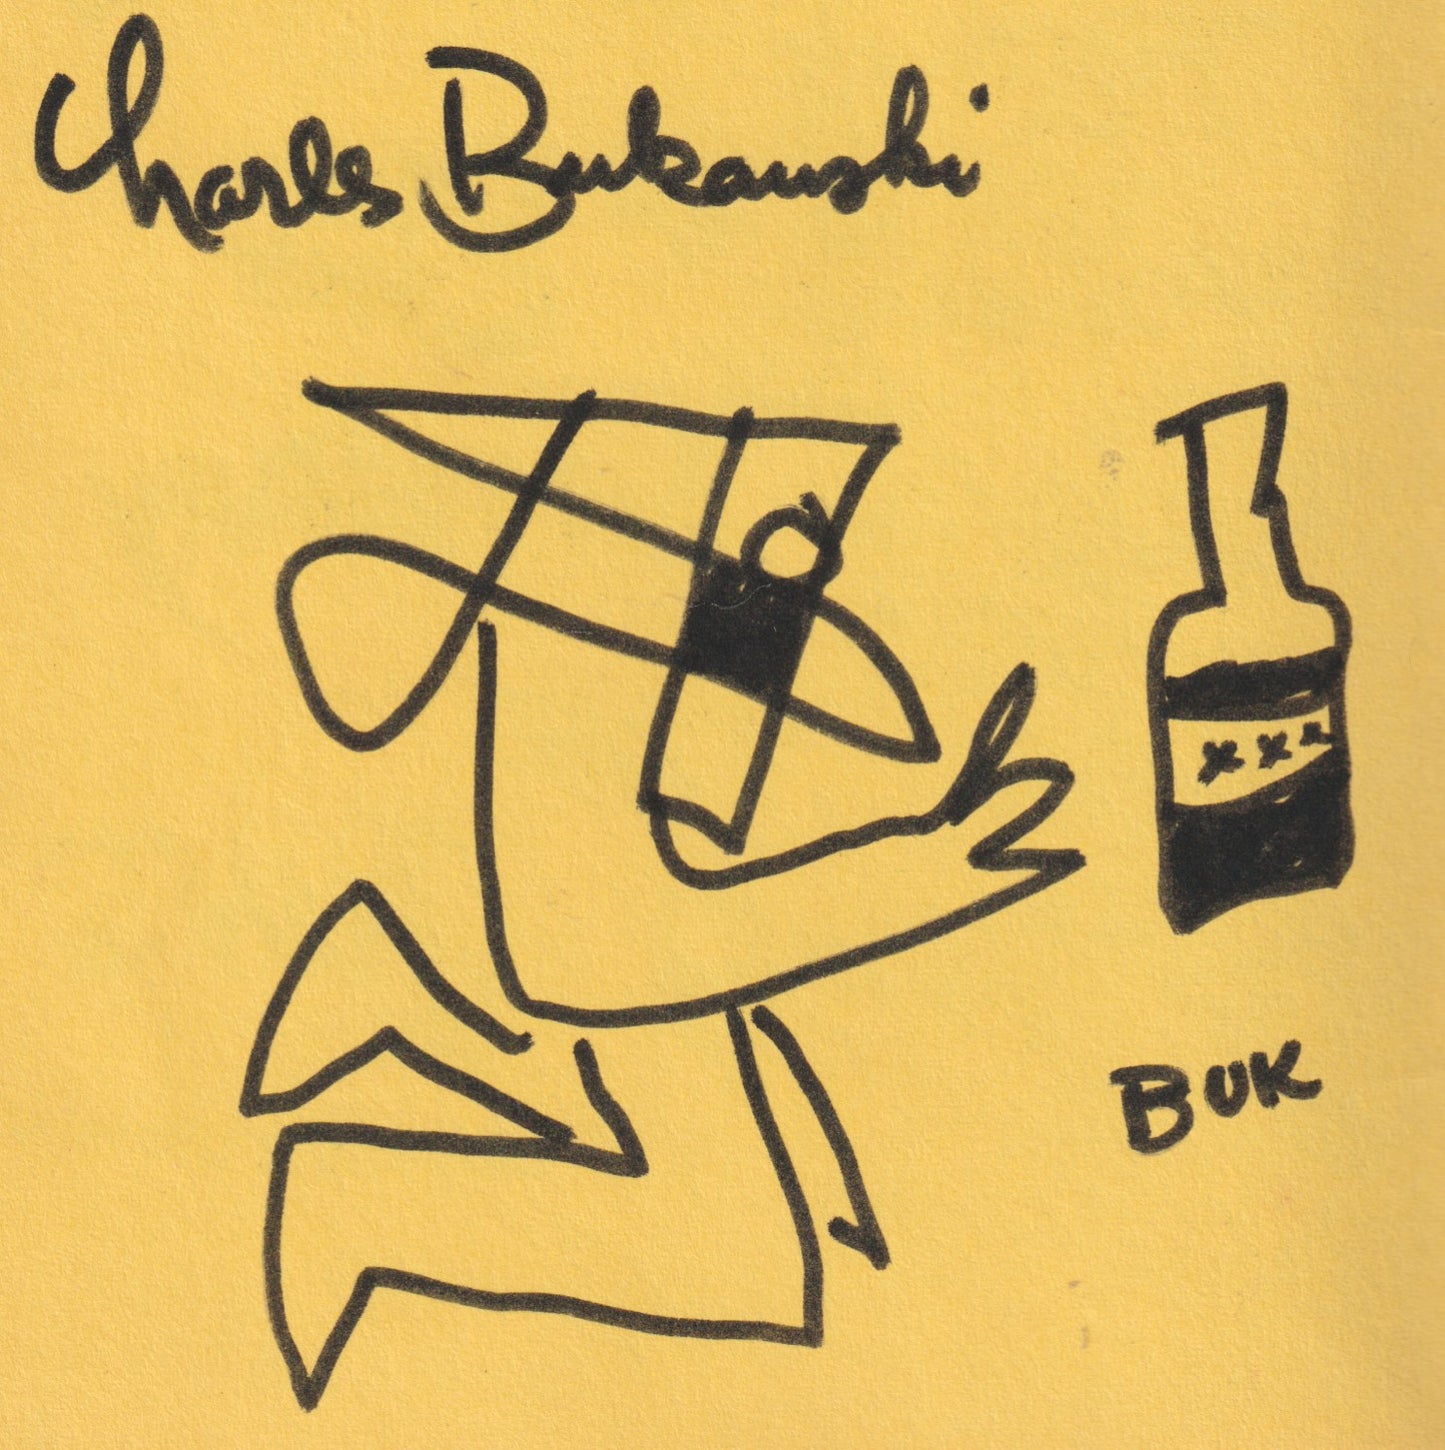 Signed with Signed Drawing by Charles Bukowski (#13): Laugh Literary And Man The Humping Guns No. 1, Charles Bukowski as Publisher, Poet and Editor